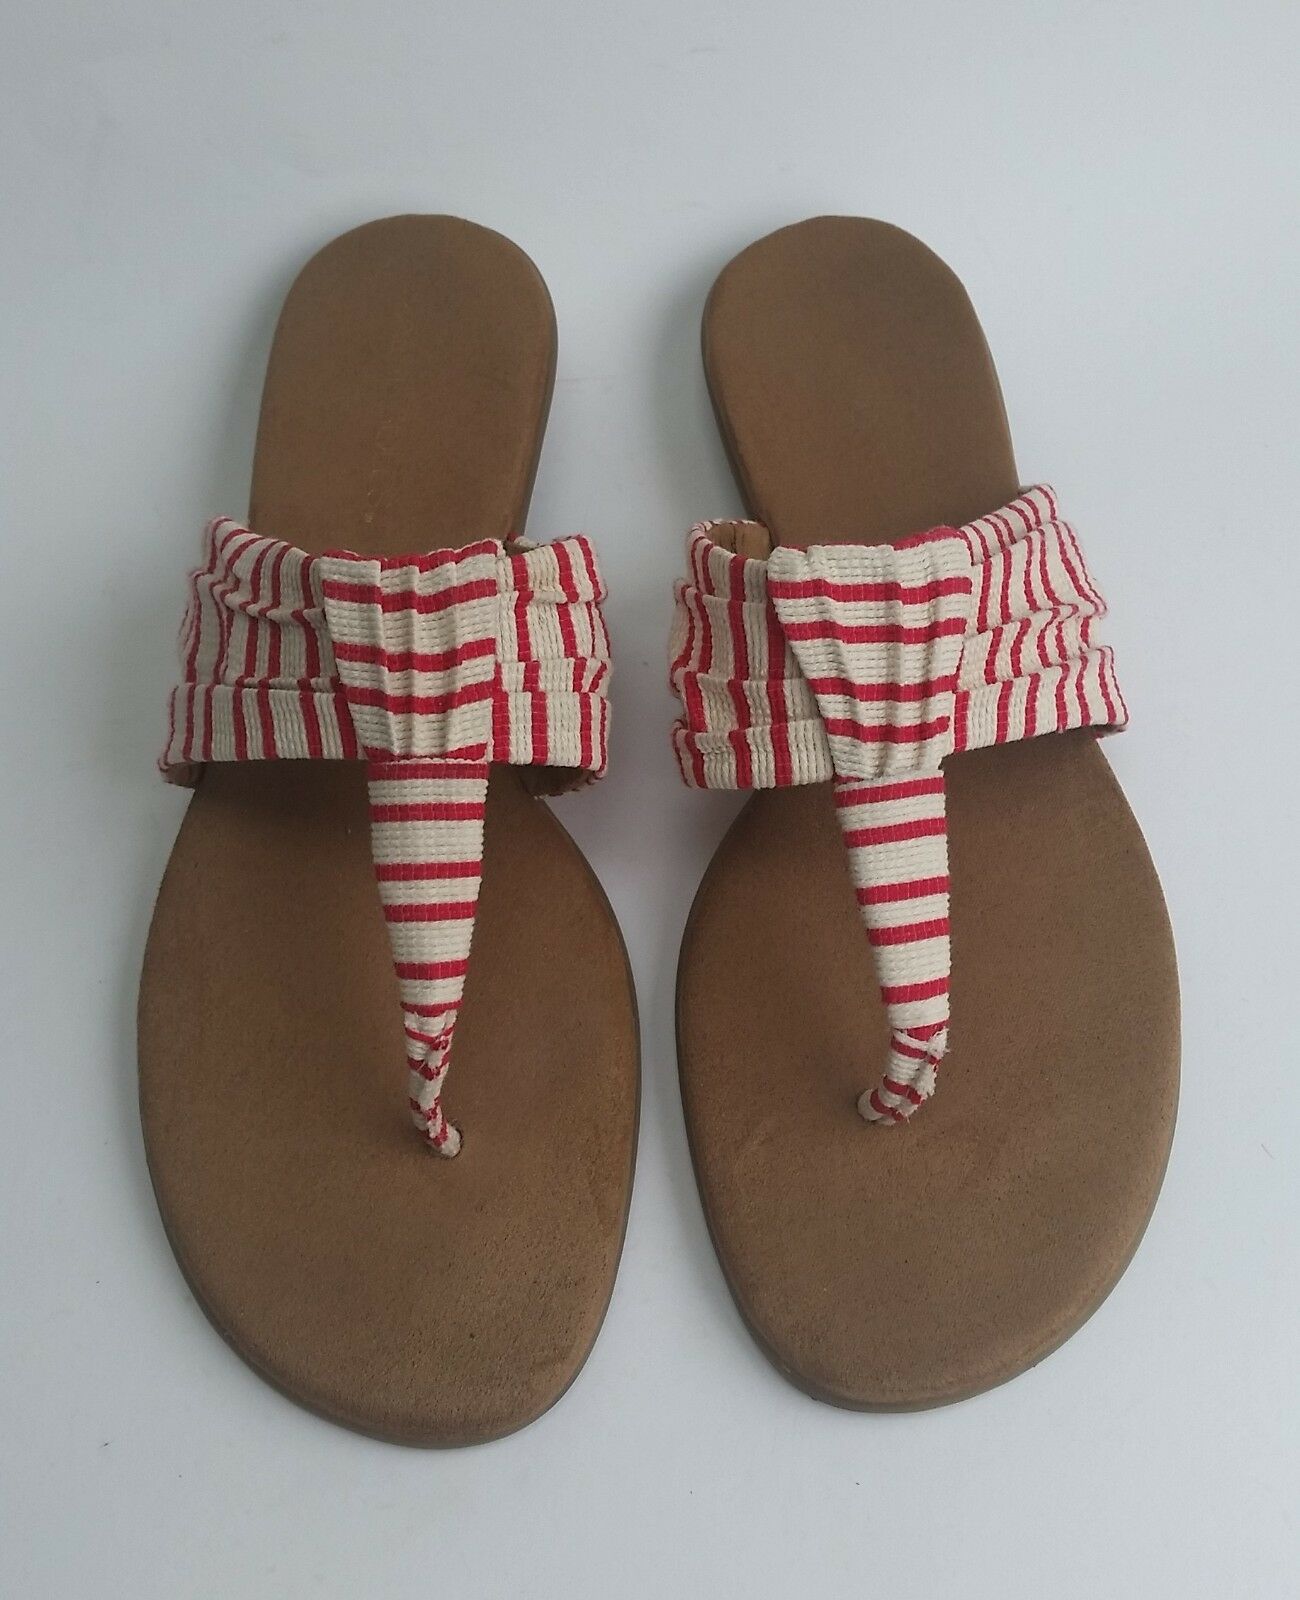 Aerosoles Womens Shoes Flip Flops Red White Multi-Color Thong Size 11